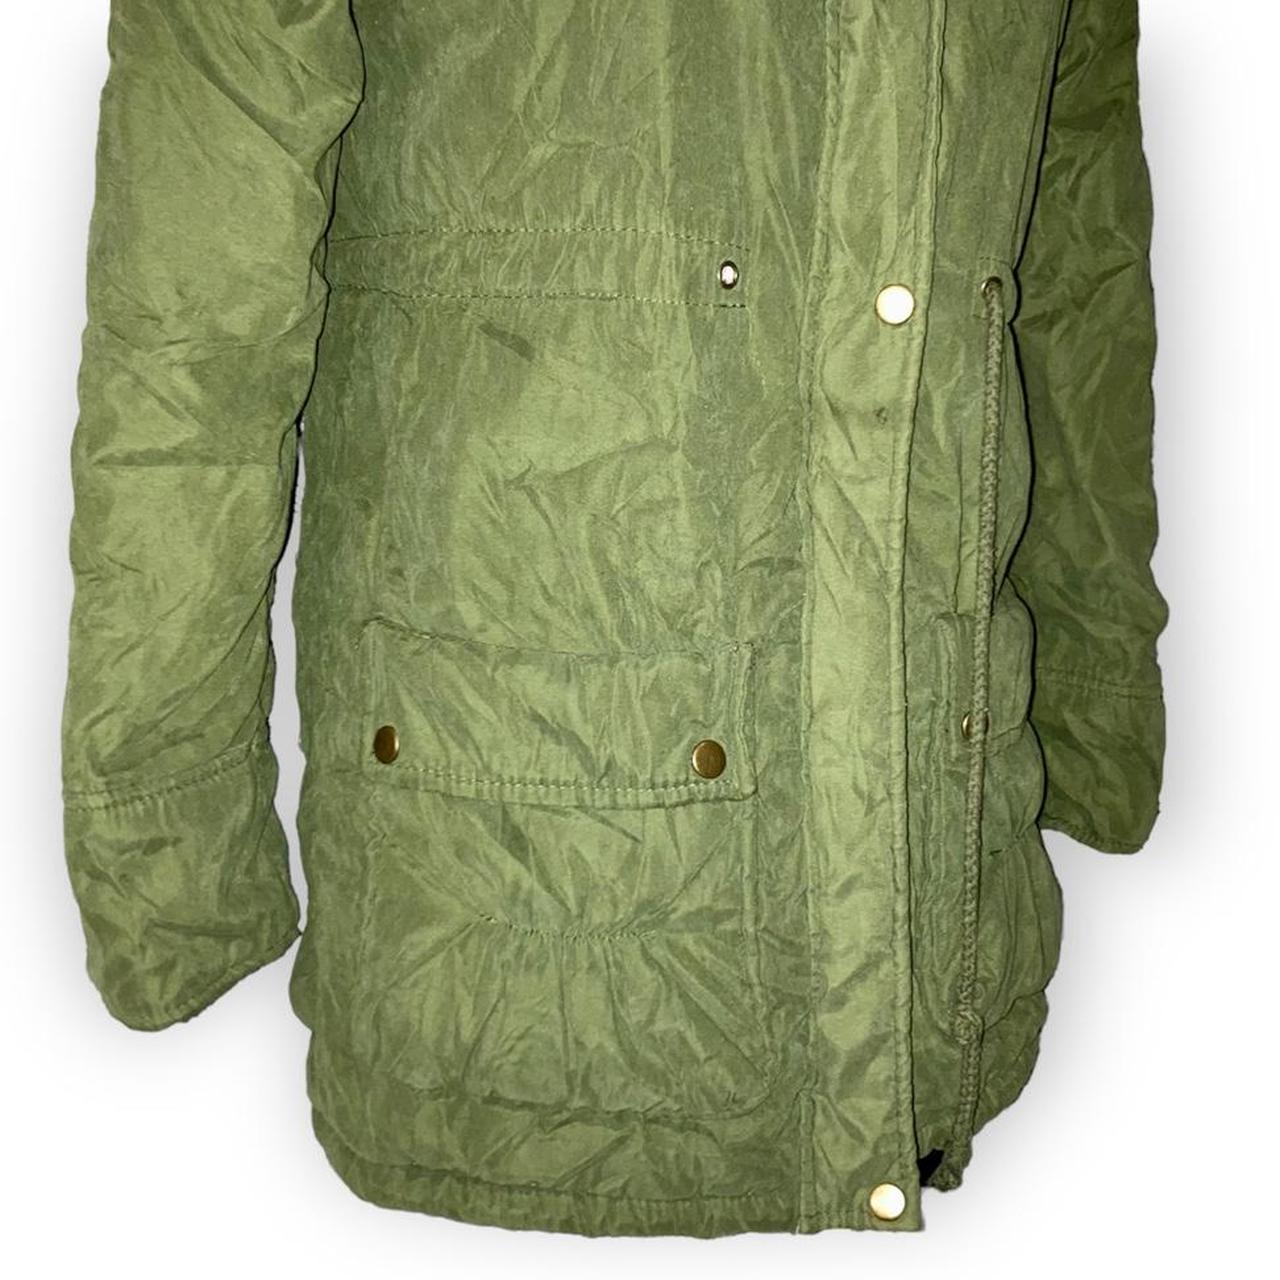 Women's White and Green Jacket (3)